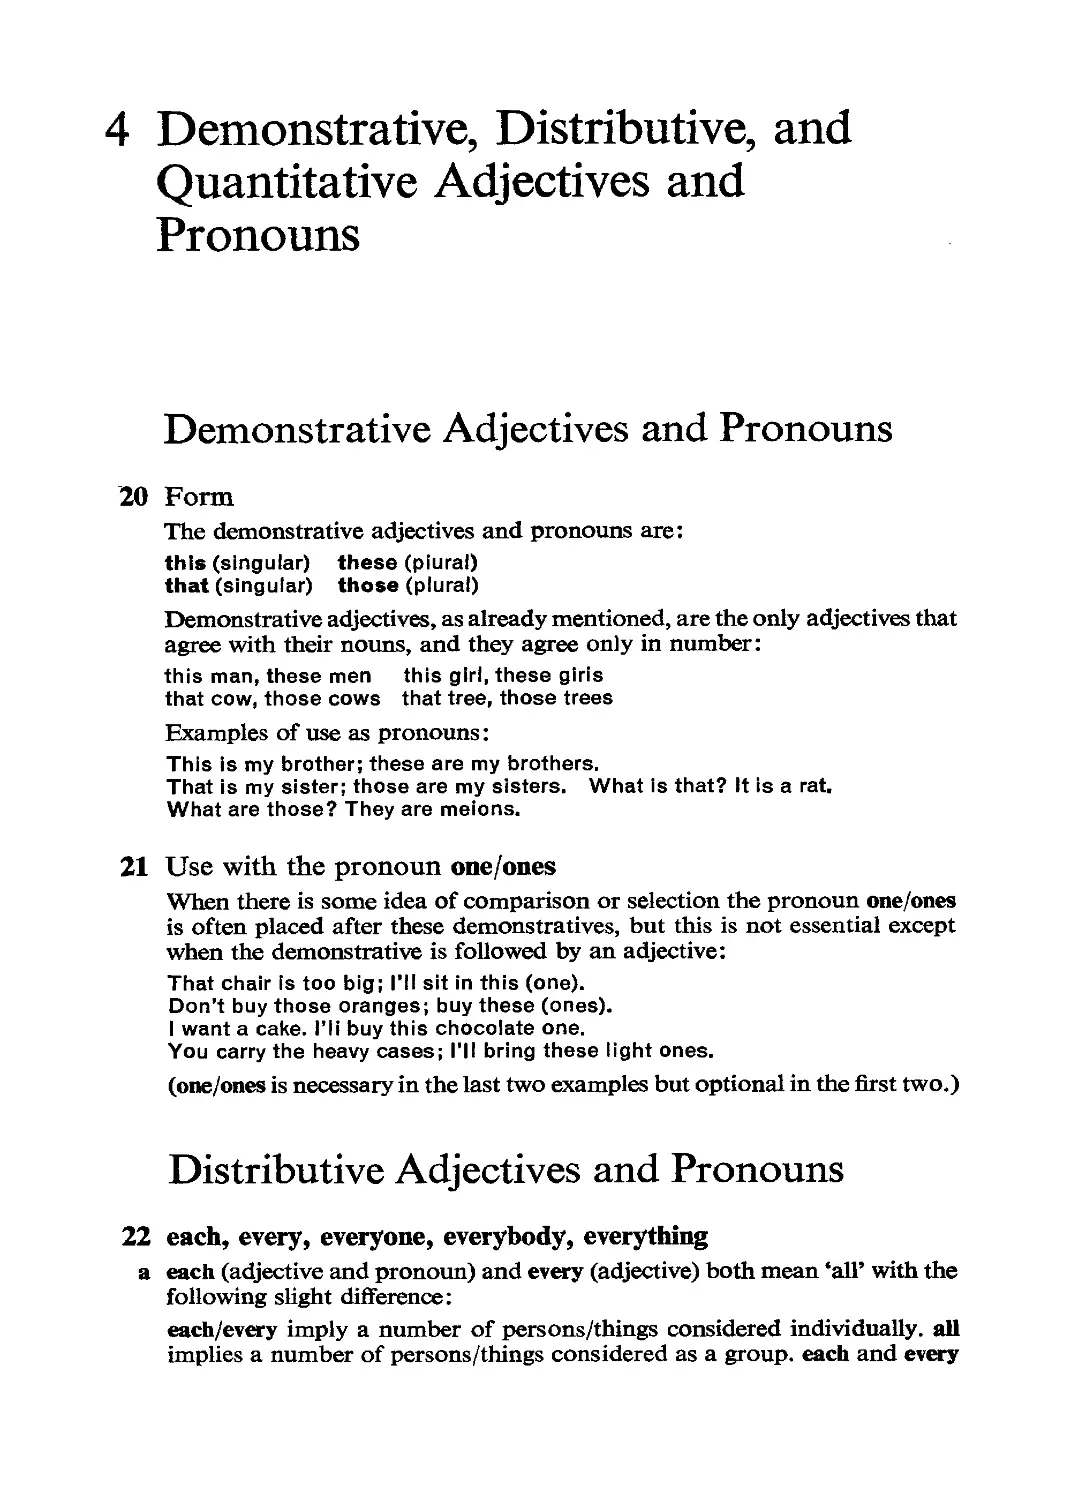 Demonstrative, Distributive and Quantitaive Adjectives and Pronouns